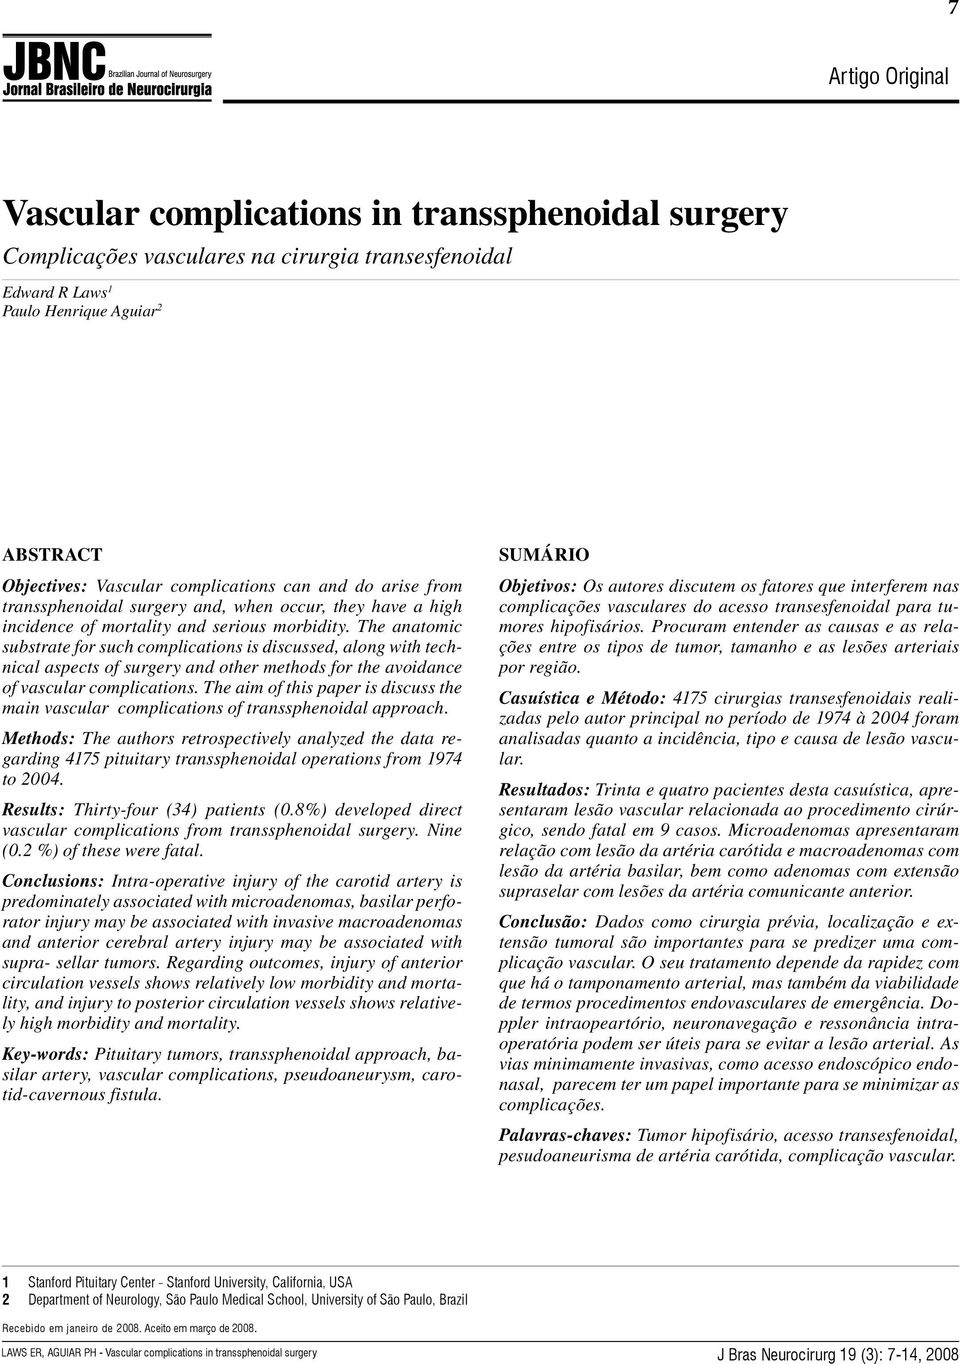 The anatomic substrate for such complications is discussed, along with technical aspects of surgery and other methods for the avoidance of vascular complications.